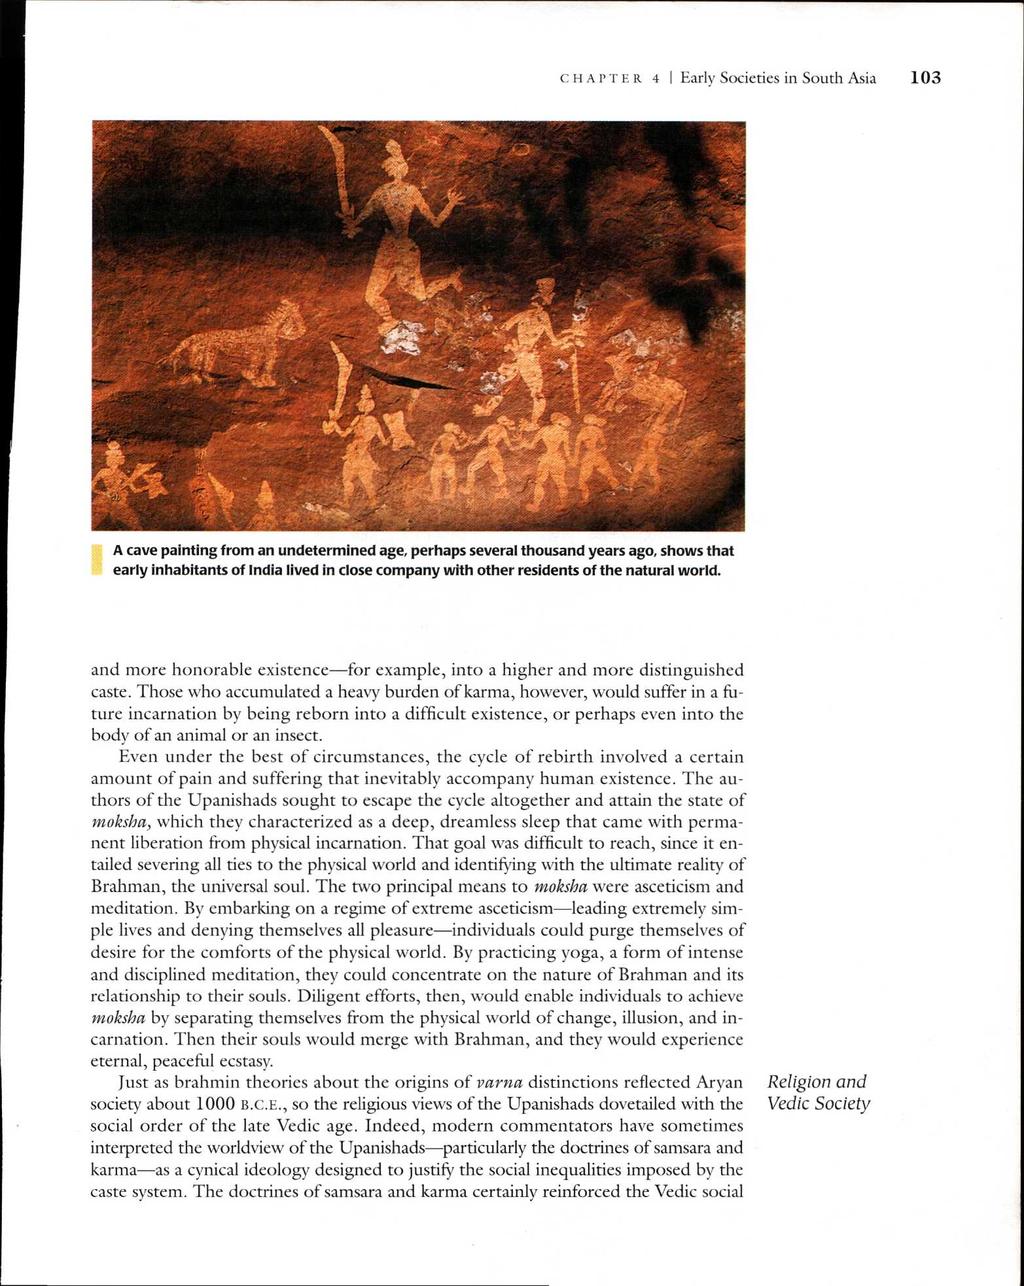 CHAPTER 4 I Early Societies in South Asia 103 A cave painting from an undetermined age, perhaps several thousand years ago, shows that early inhabitants of India lived in close company with other